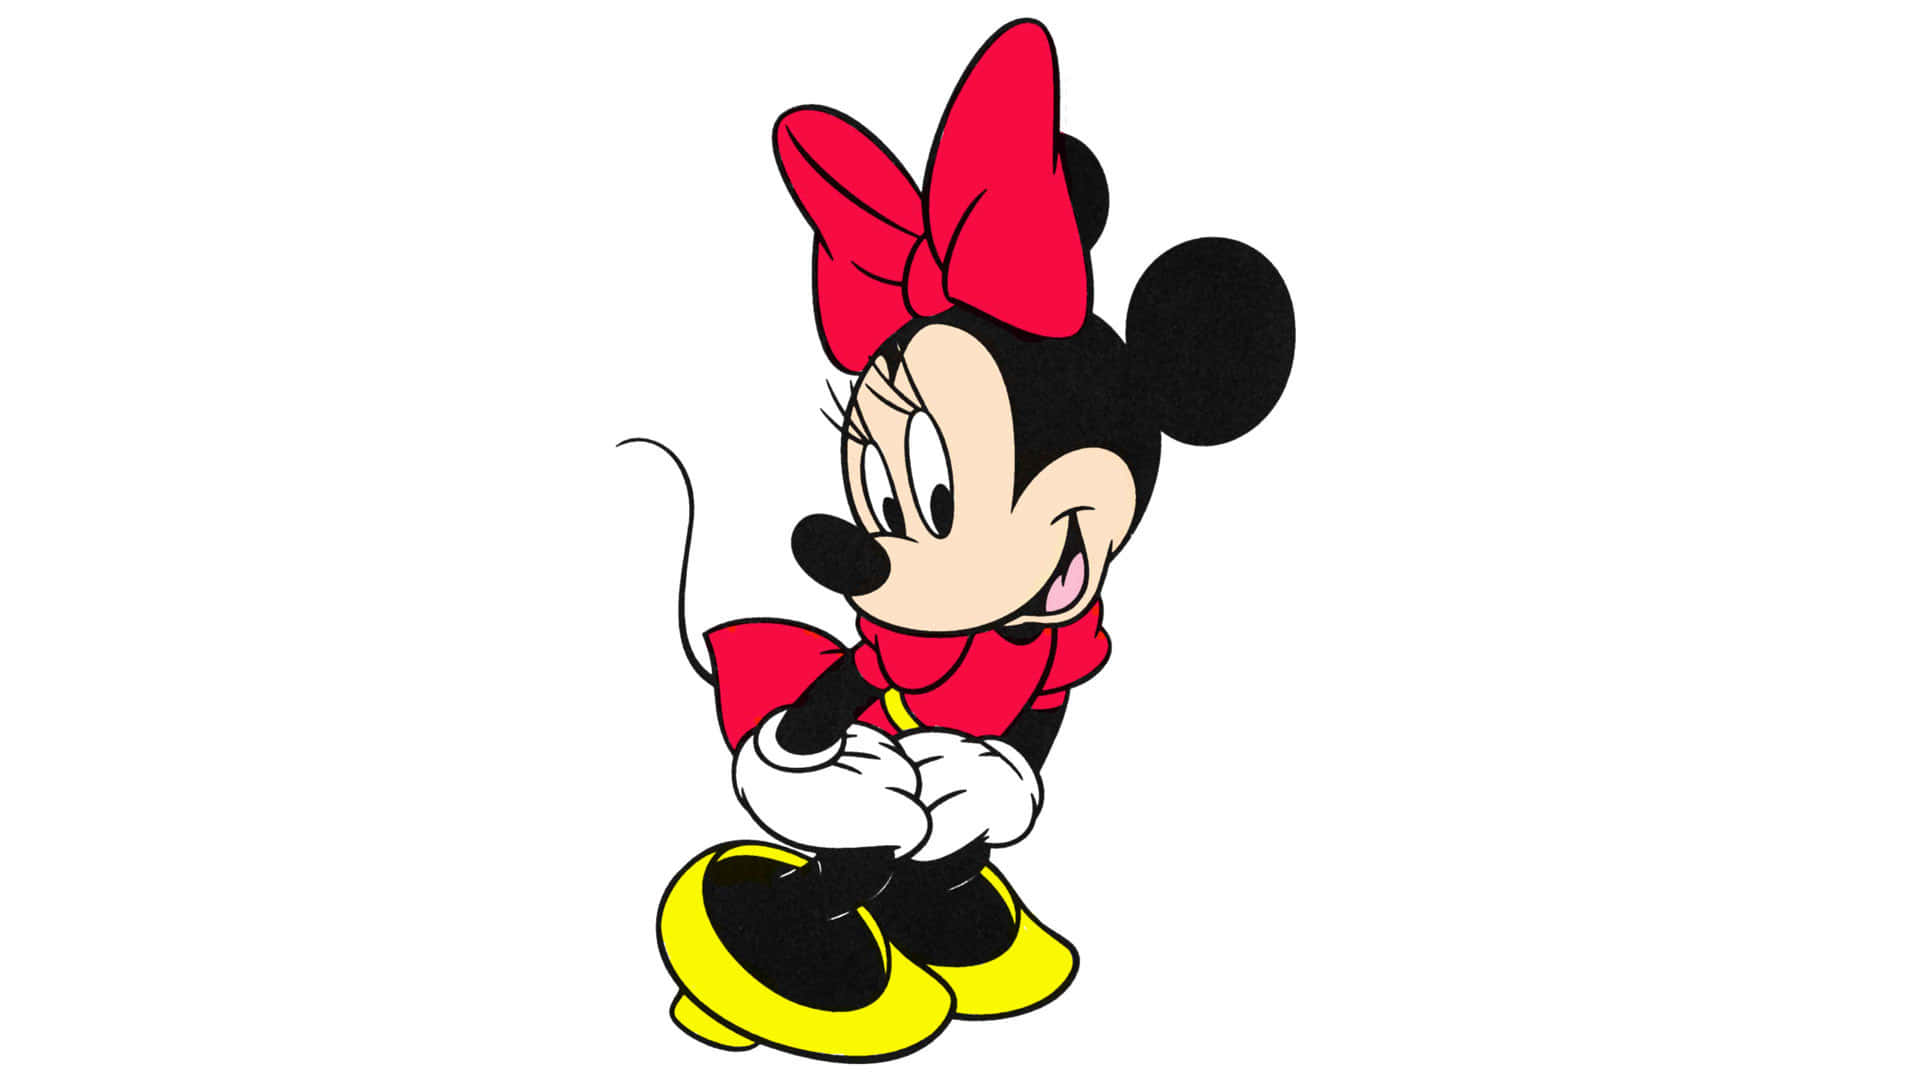 Minnie Mouse and her iconic polka dot ribbon